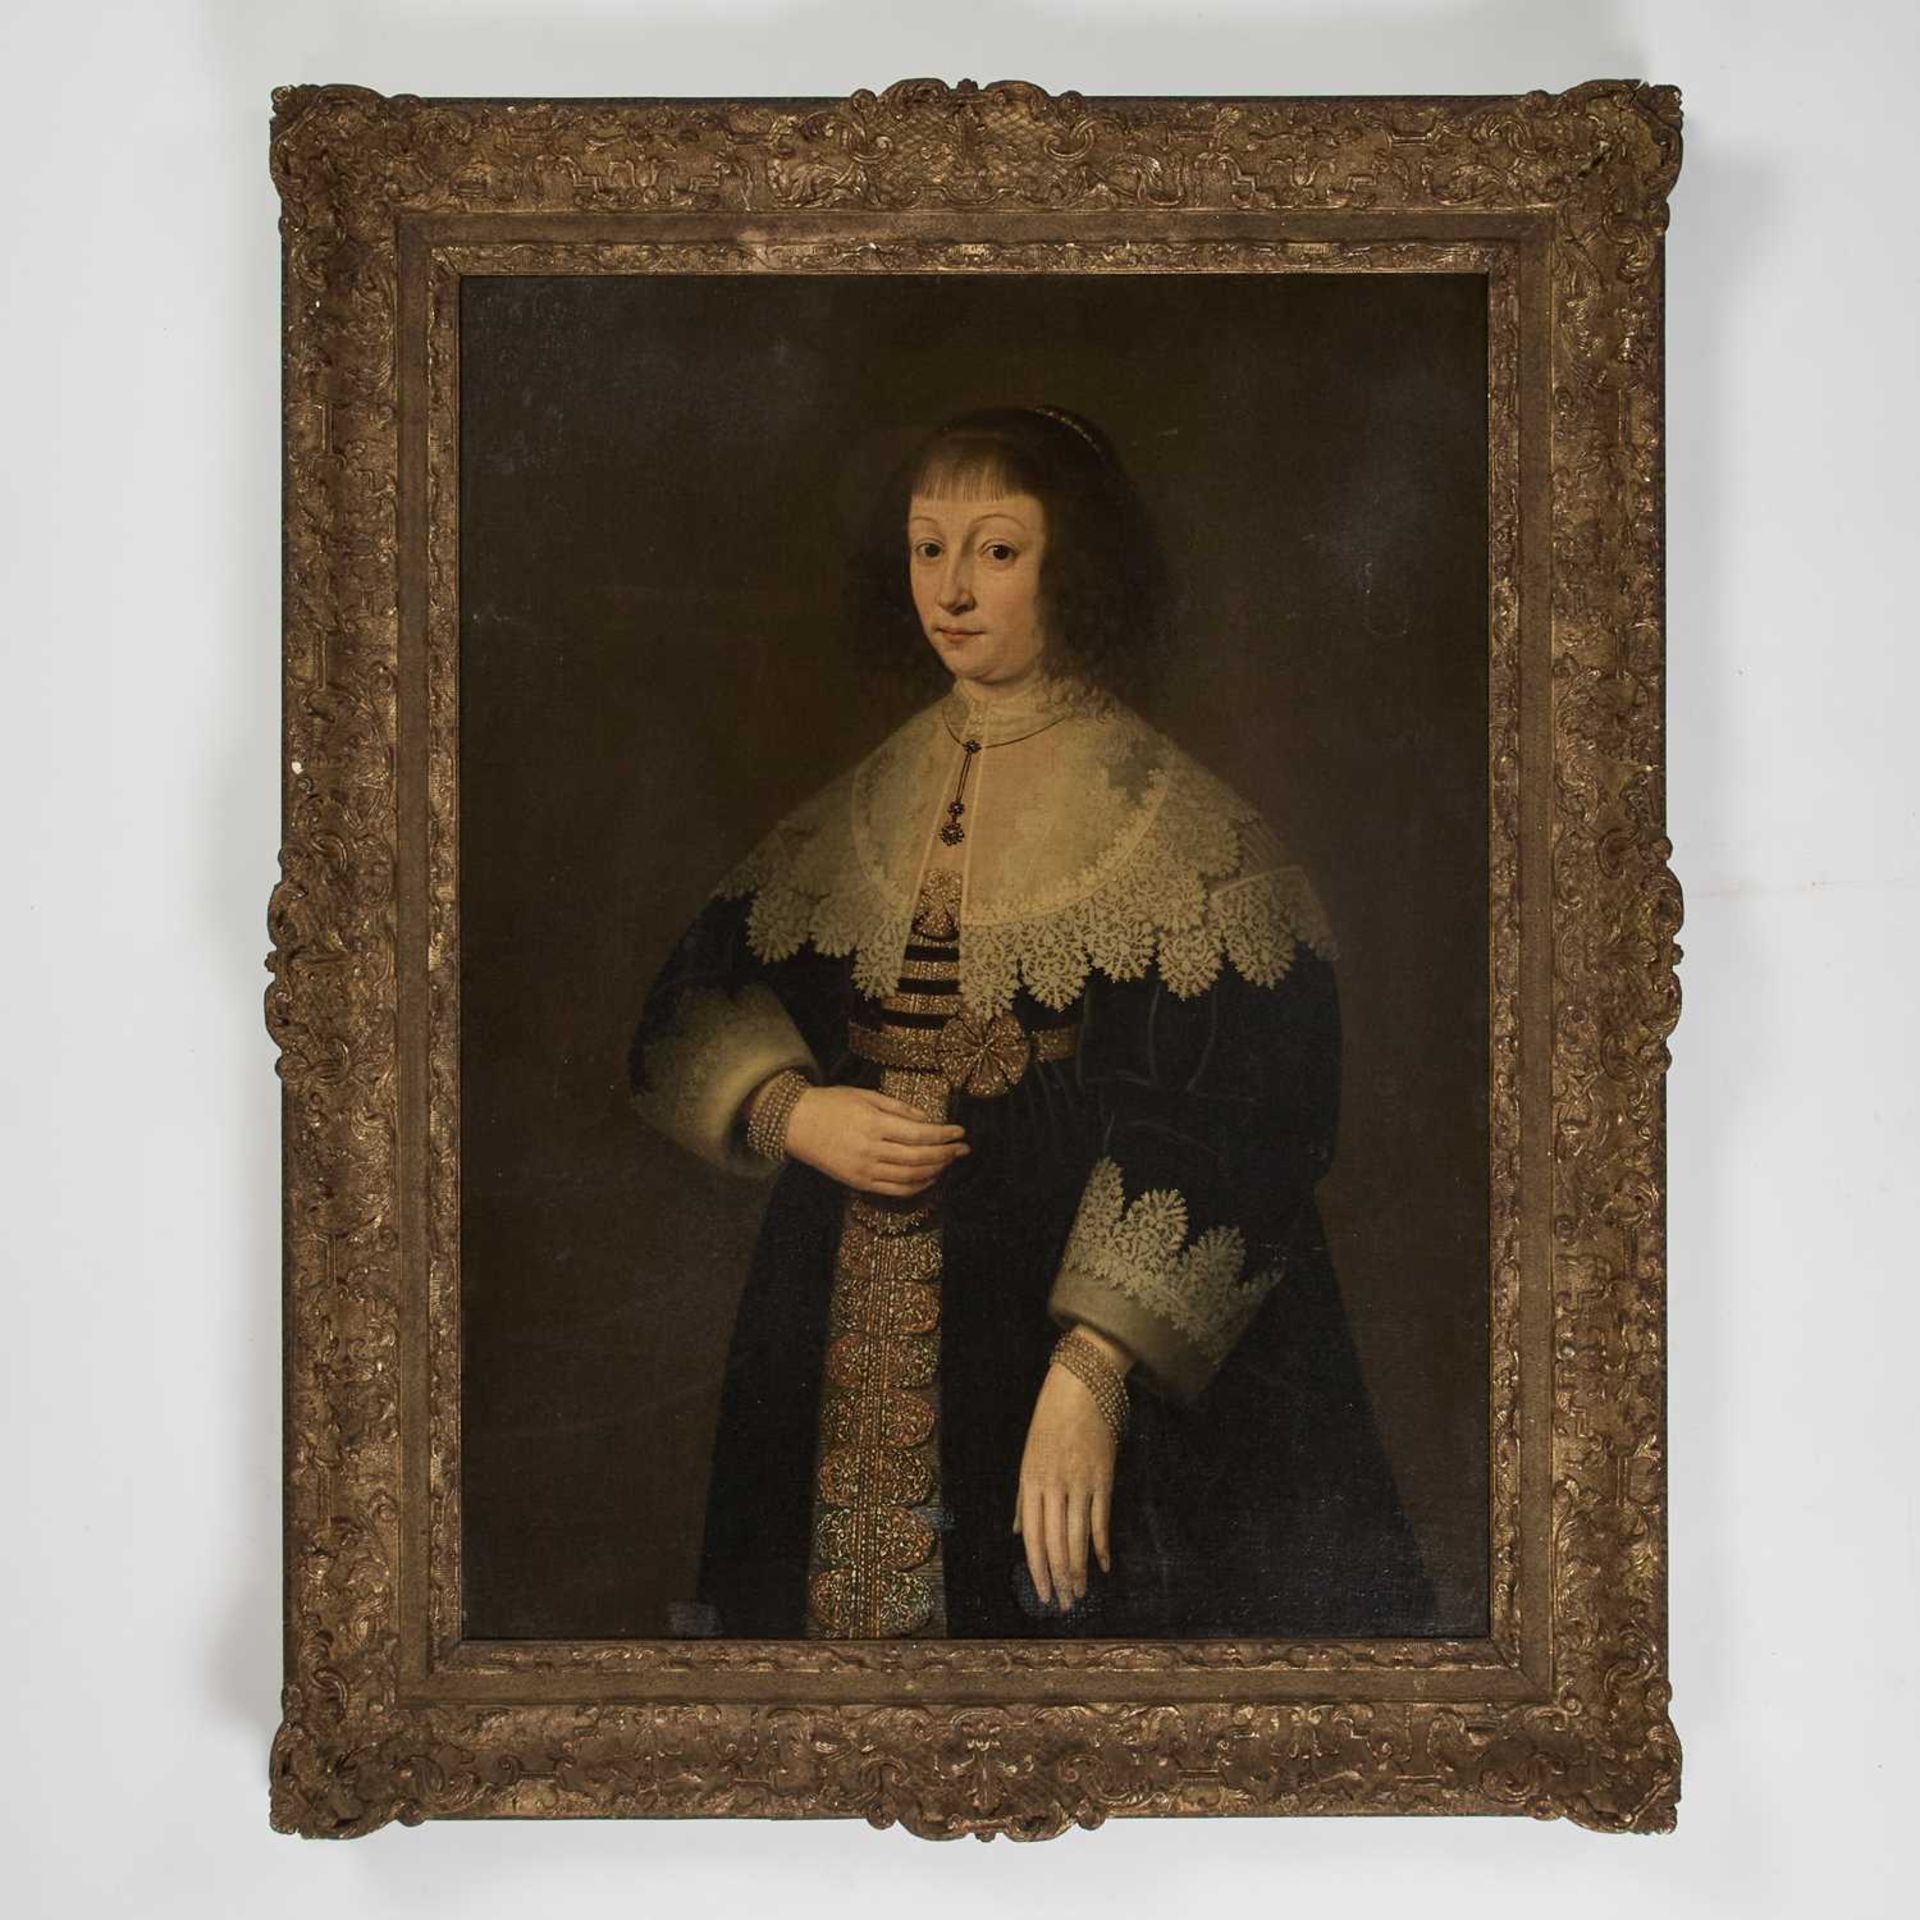 17TH CENTURY DUTCH STYLE (LATE 18TH/ EARLY 19TH CENTURY) PORTRAIT OF A LADY - Image 2 of 3